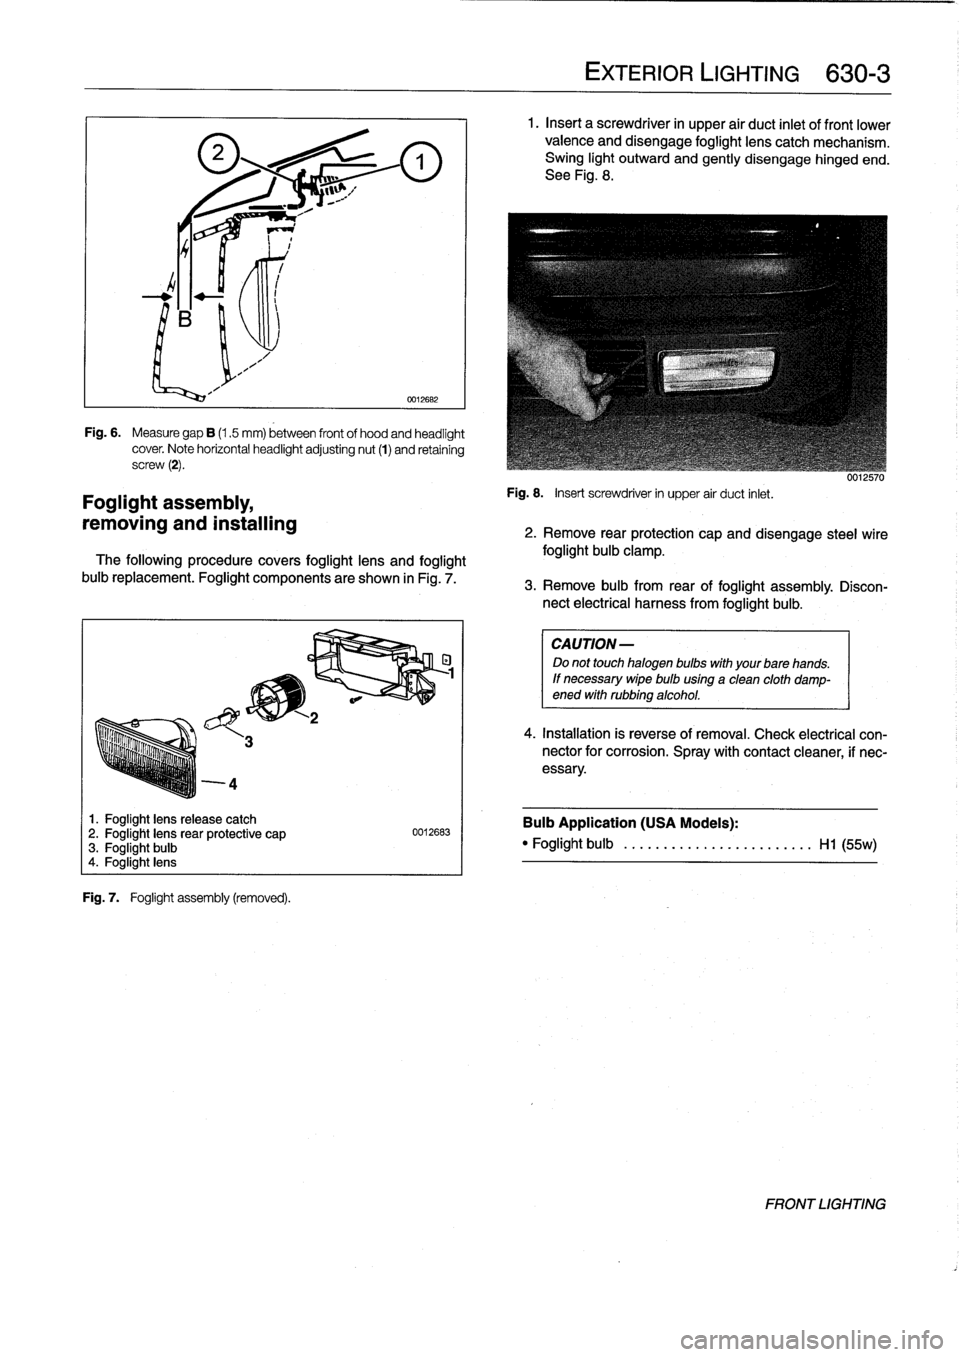 BMW 318i 1995 E36 Workshop Manual 4

Foglight
assembly,

removing
and
installing

1
.
Foglight
lens
release
catch
2
.
Foglight
lensrear
protective
cap
3
.
Foglight
bulb
4
.
Foglight
lens

Fig
.
7
.

	

Foglight
assembly
(removed)
.

0